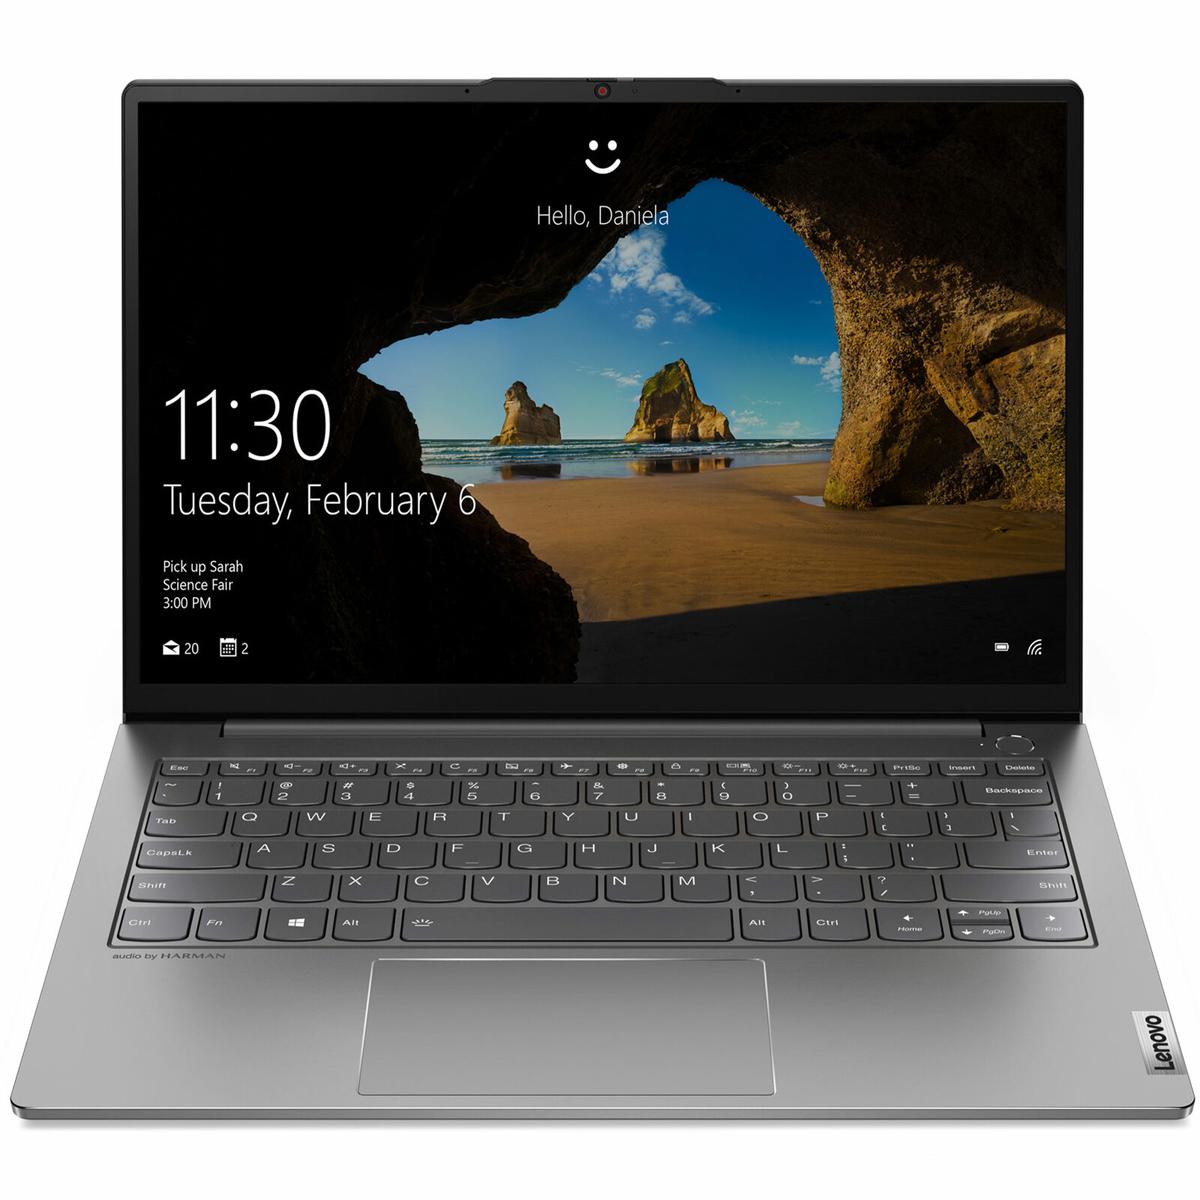 Lenovo ThinkBook 13s G2 i7 16GB 512GB Notebook Laptop for $749.99 Shipped